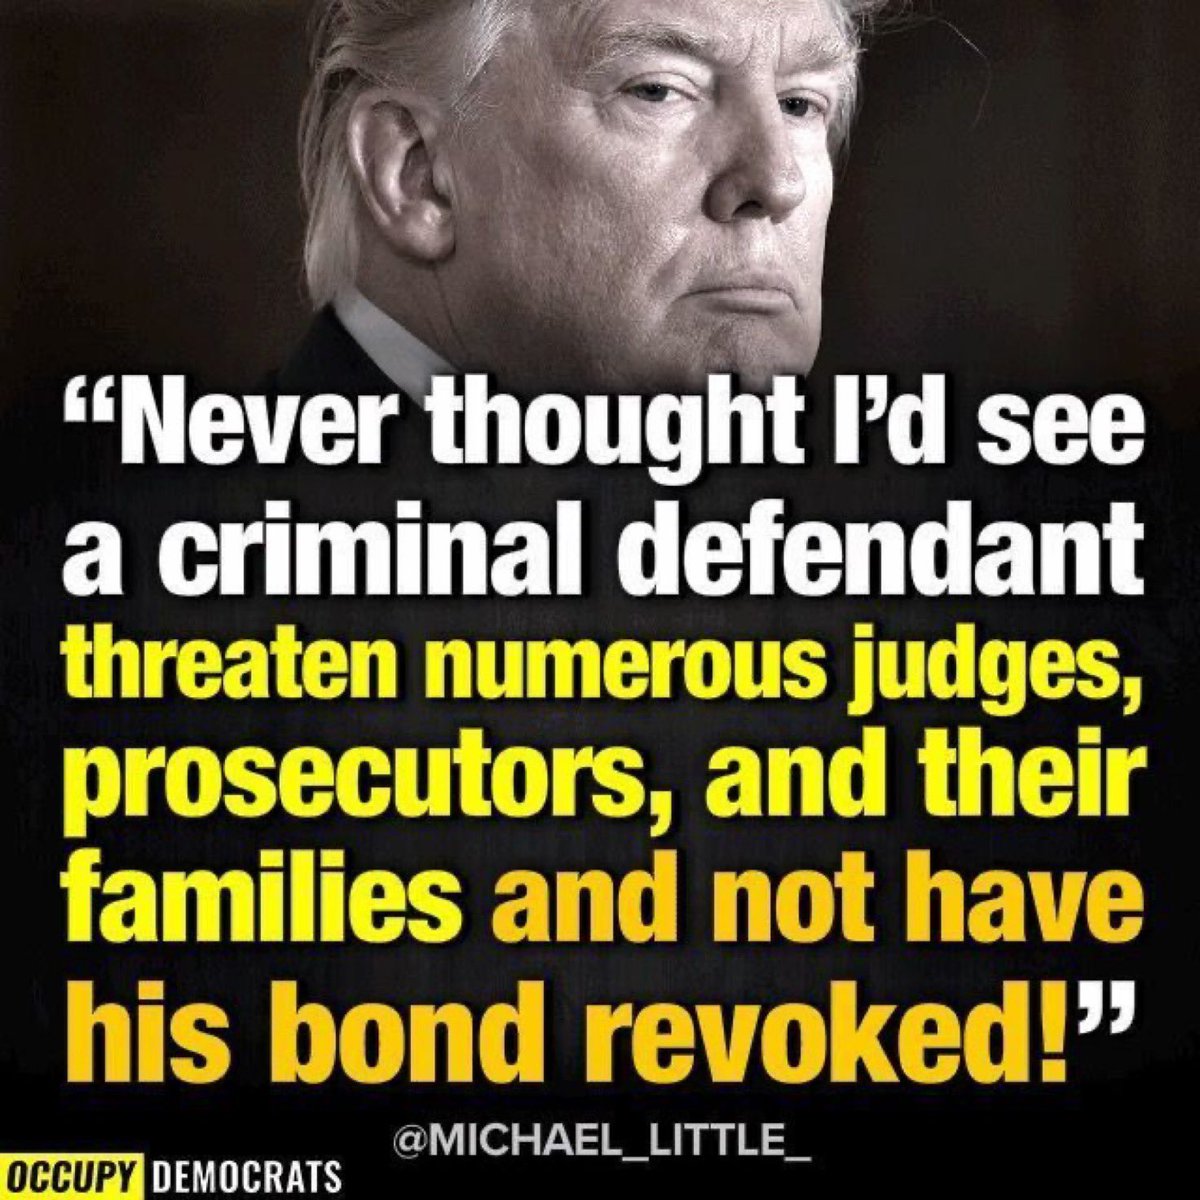 'Never thought I'd see a criminal defendant threaten numerous judges, prosecutors, and their families and not have his bond revoked!' 
NO ONE IS ABOVE THE LAW???